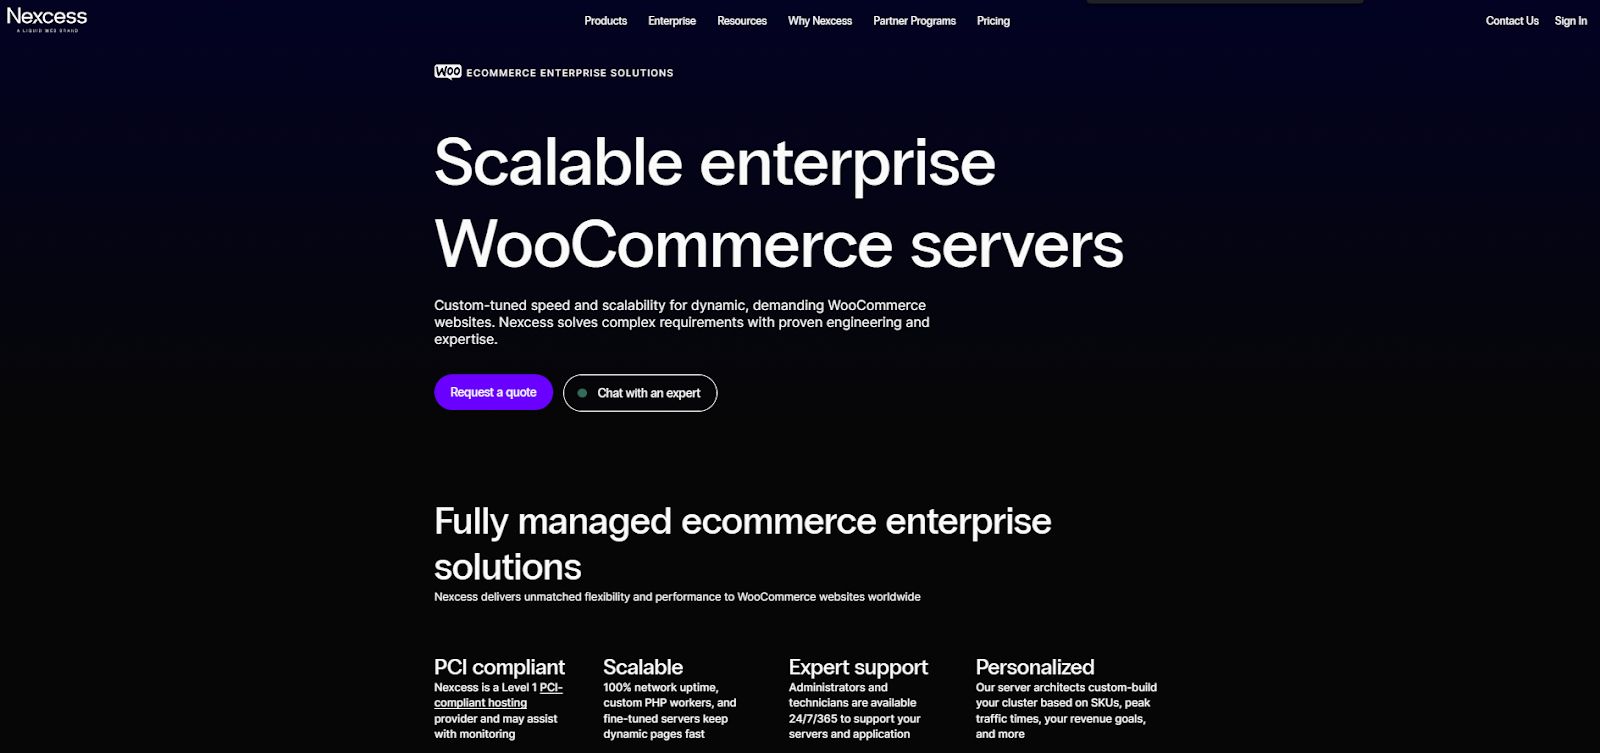 Key features of the ecommerce enterprise solution from Nexcess.